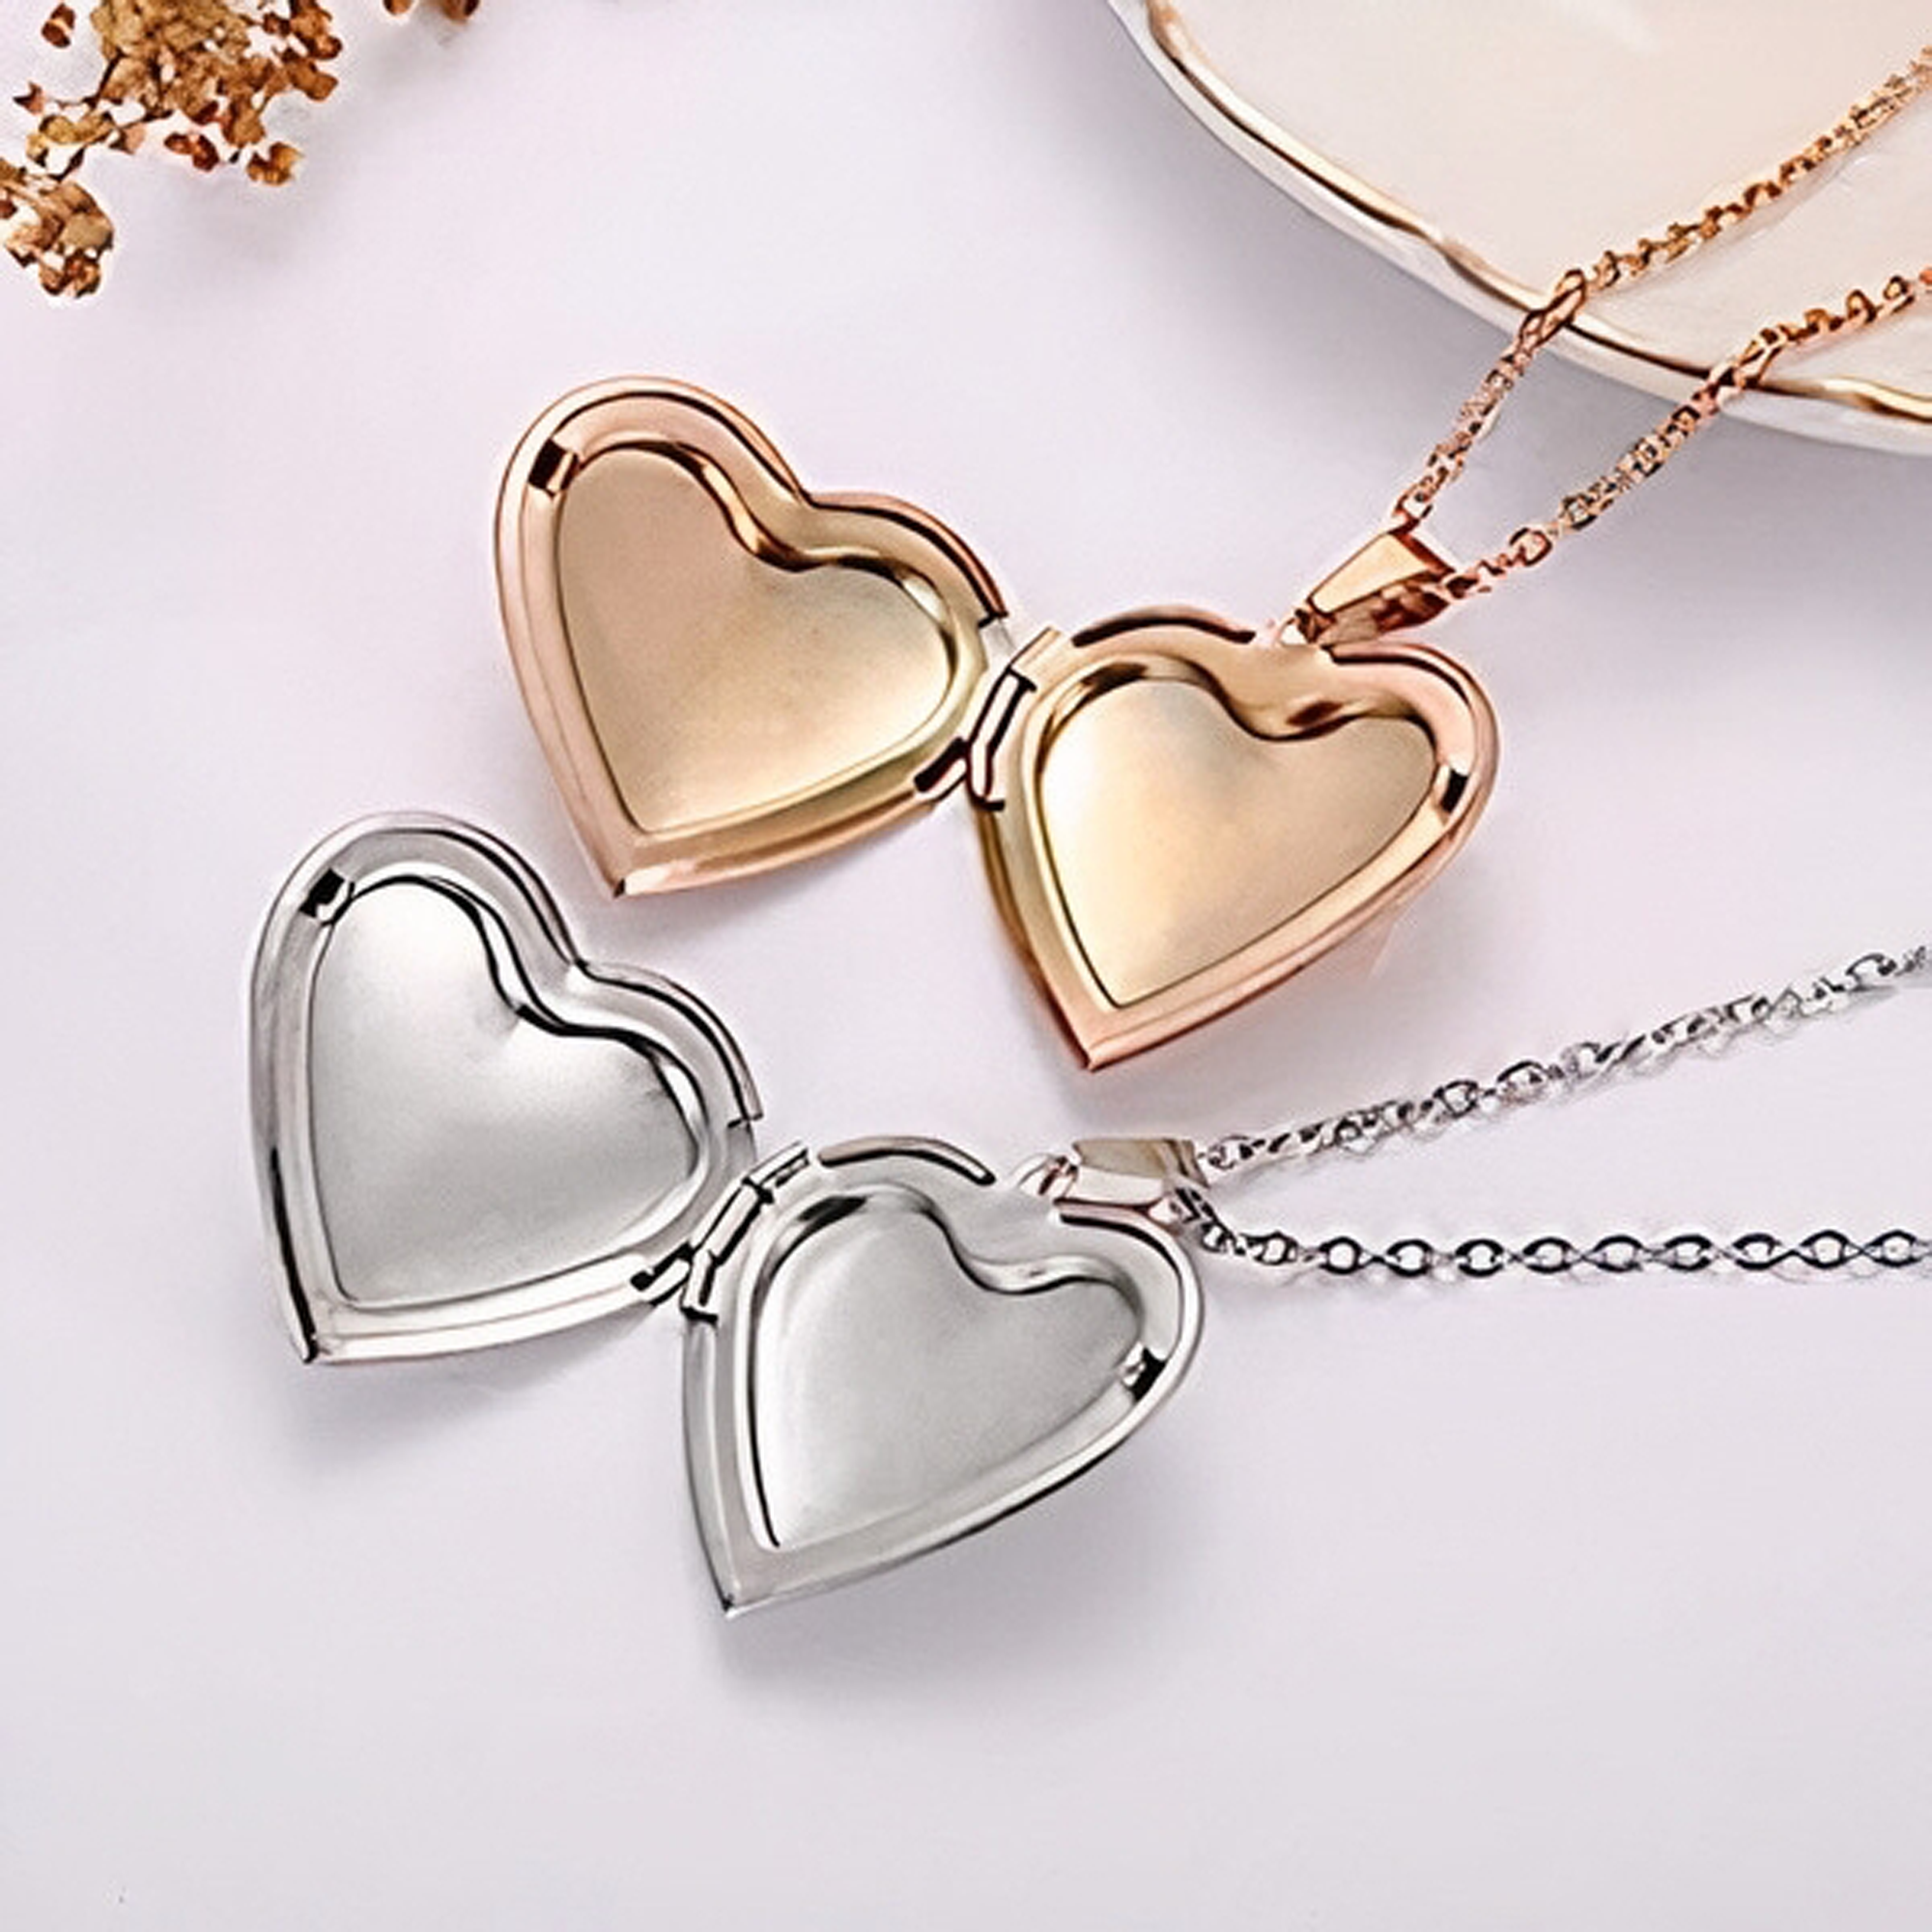 Engraved Photo Heart Locket Necklace KCL 33